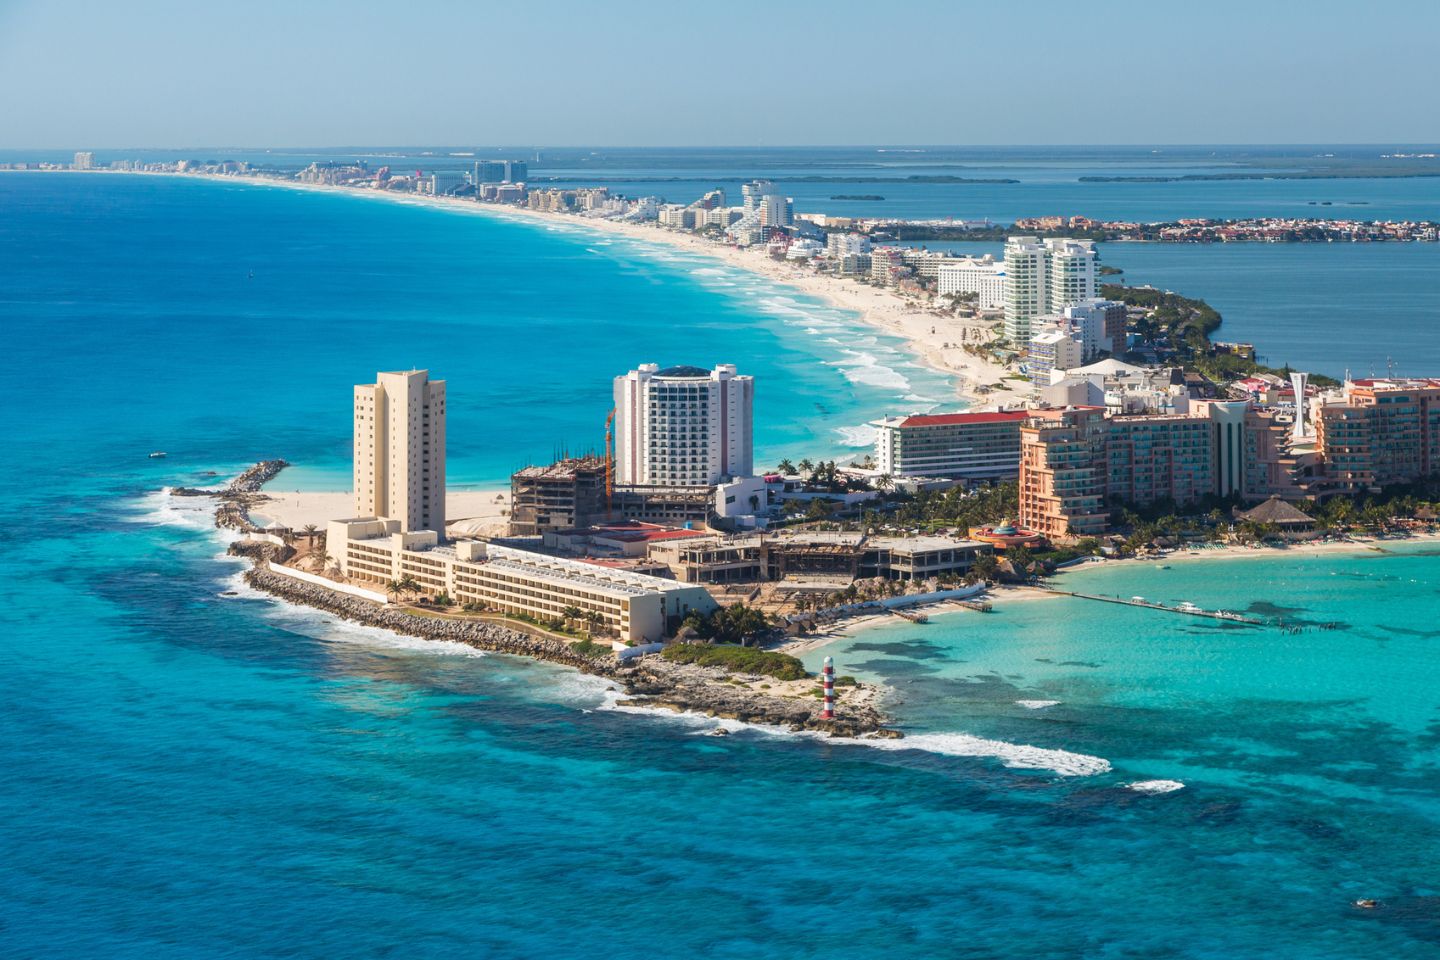 What The U.S. Travel Warning About Mexico Means For Spring Breakers